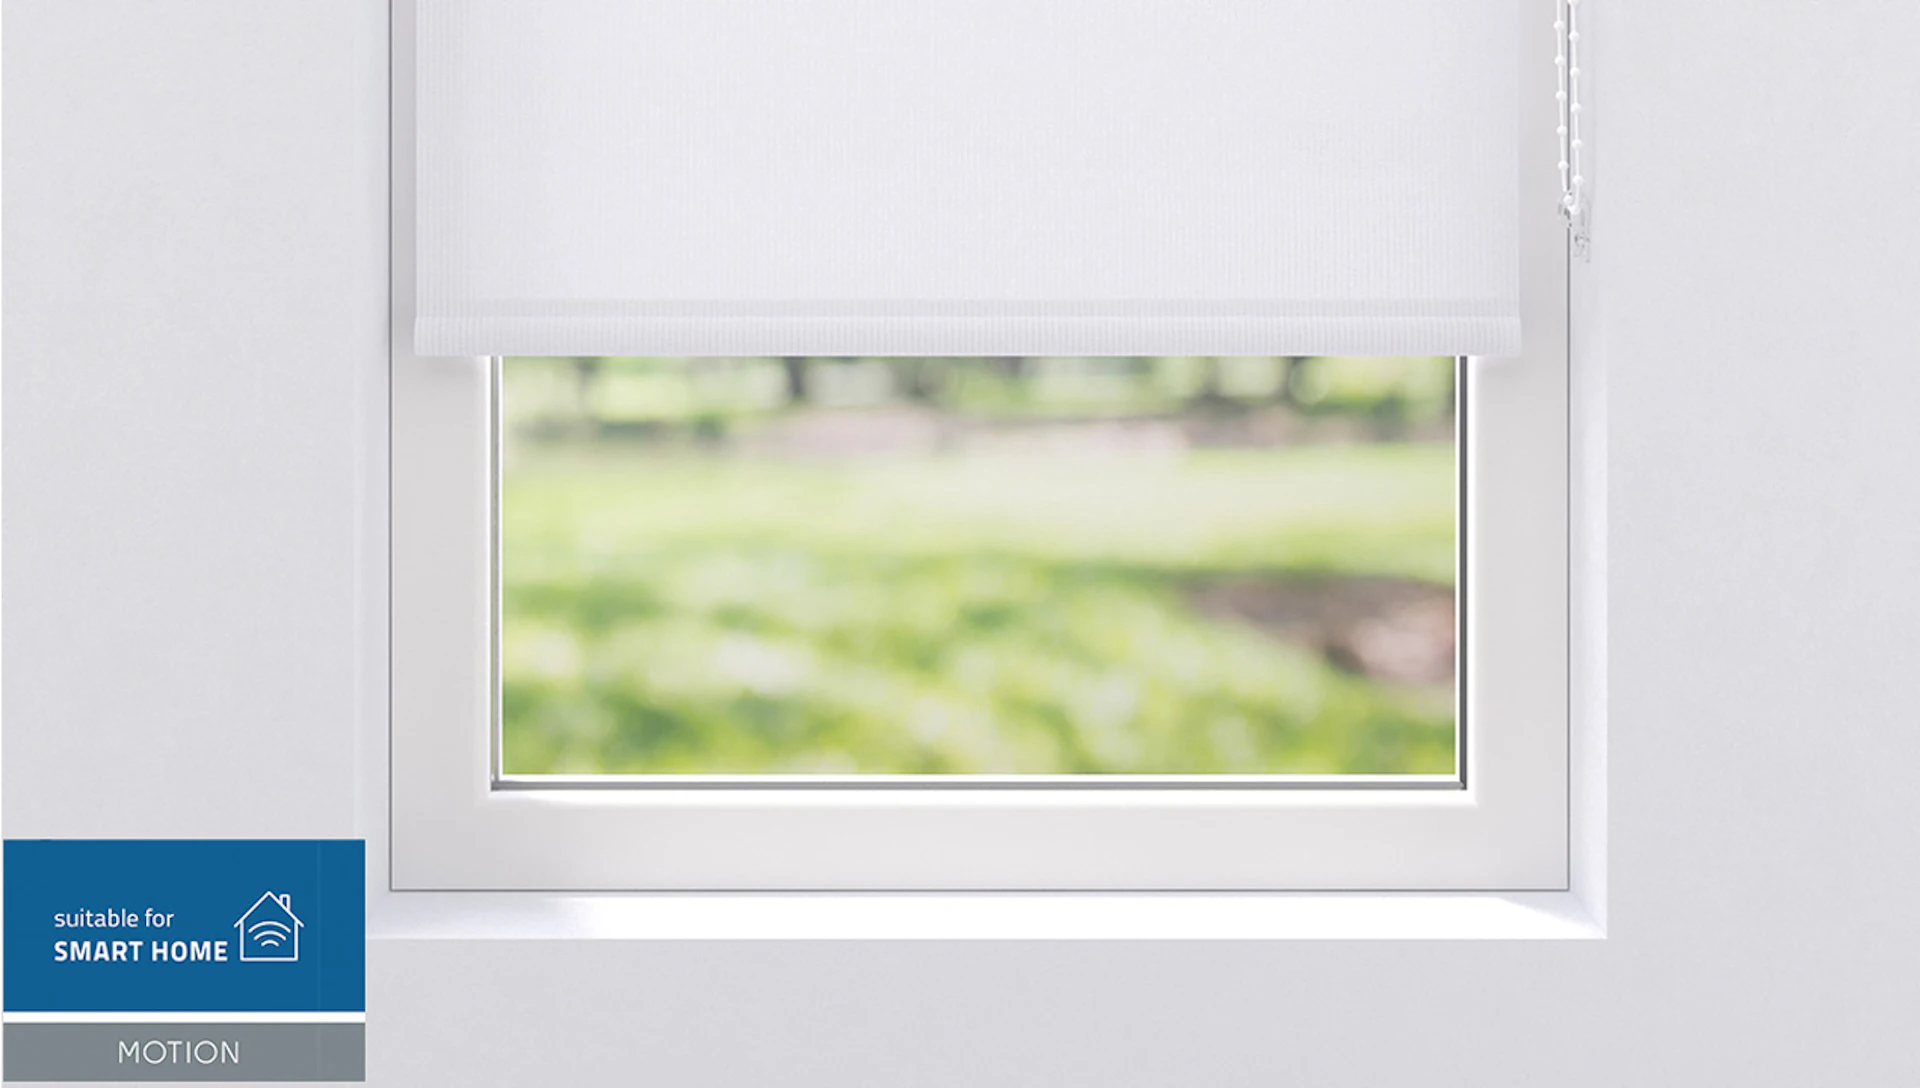 planeo roller blind 25mm TL Screen - white 210 x 190 cm